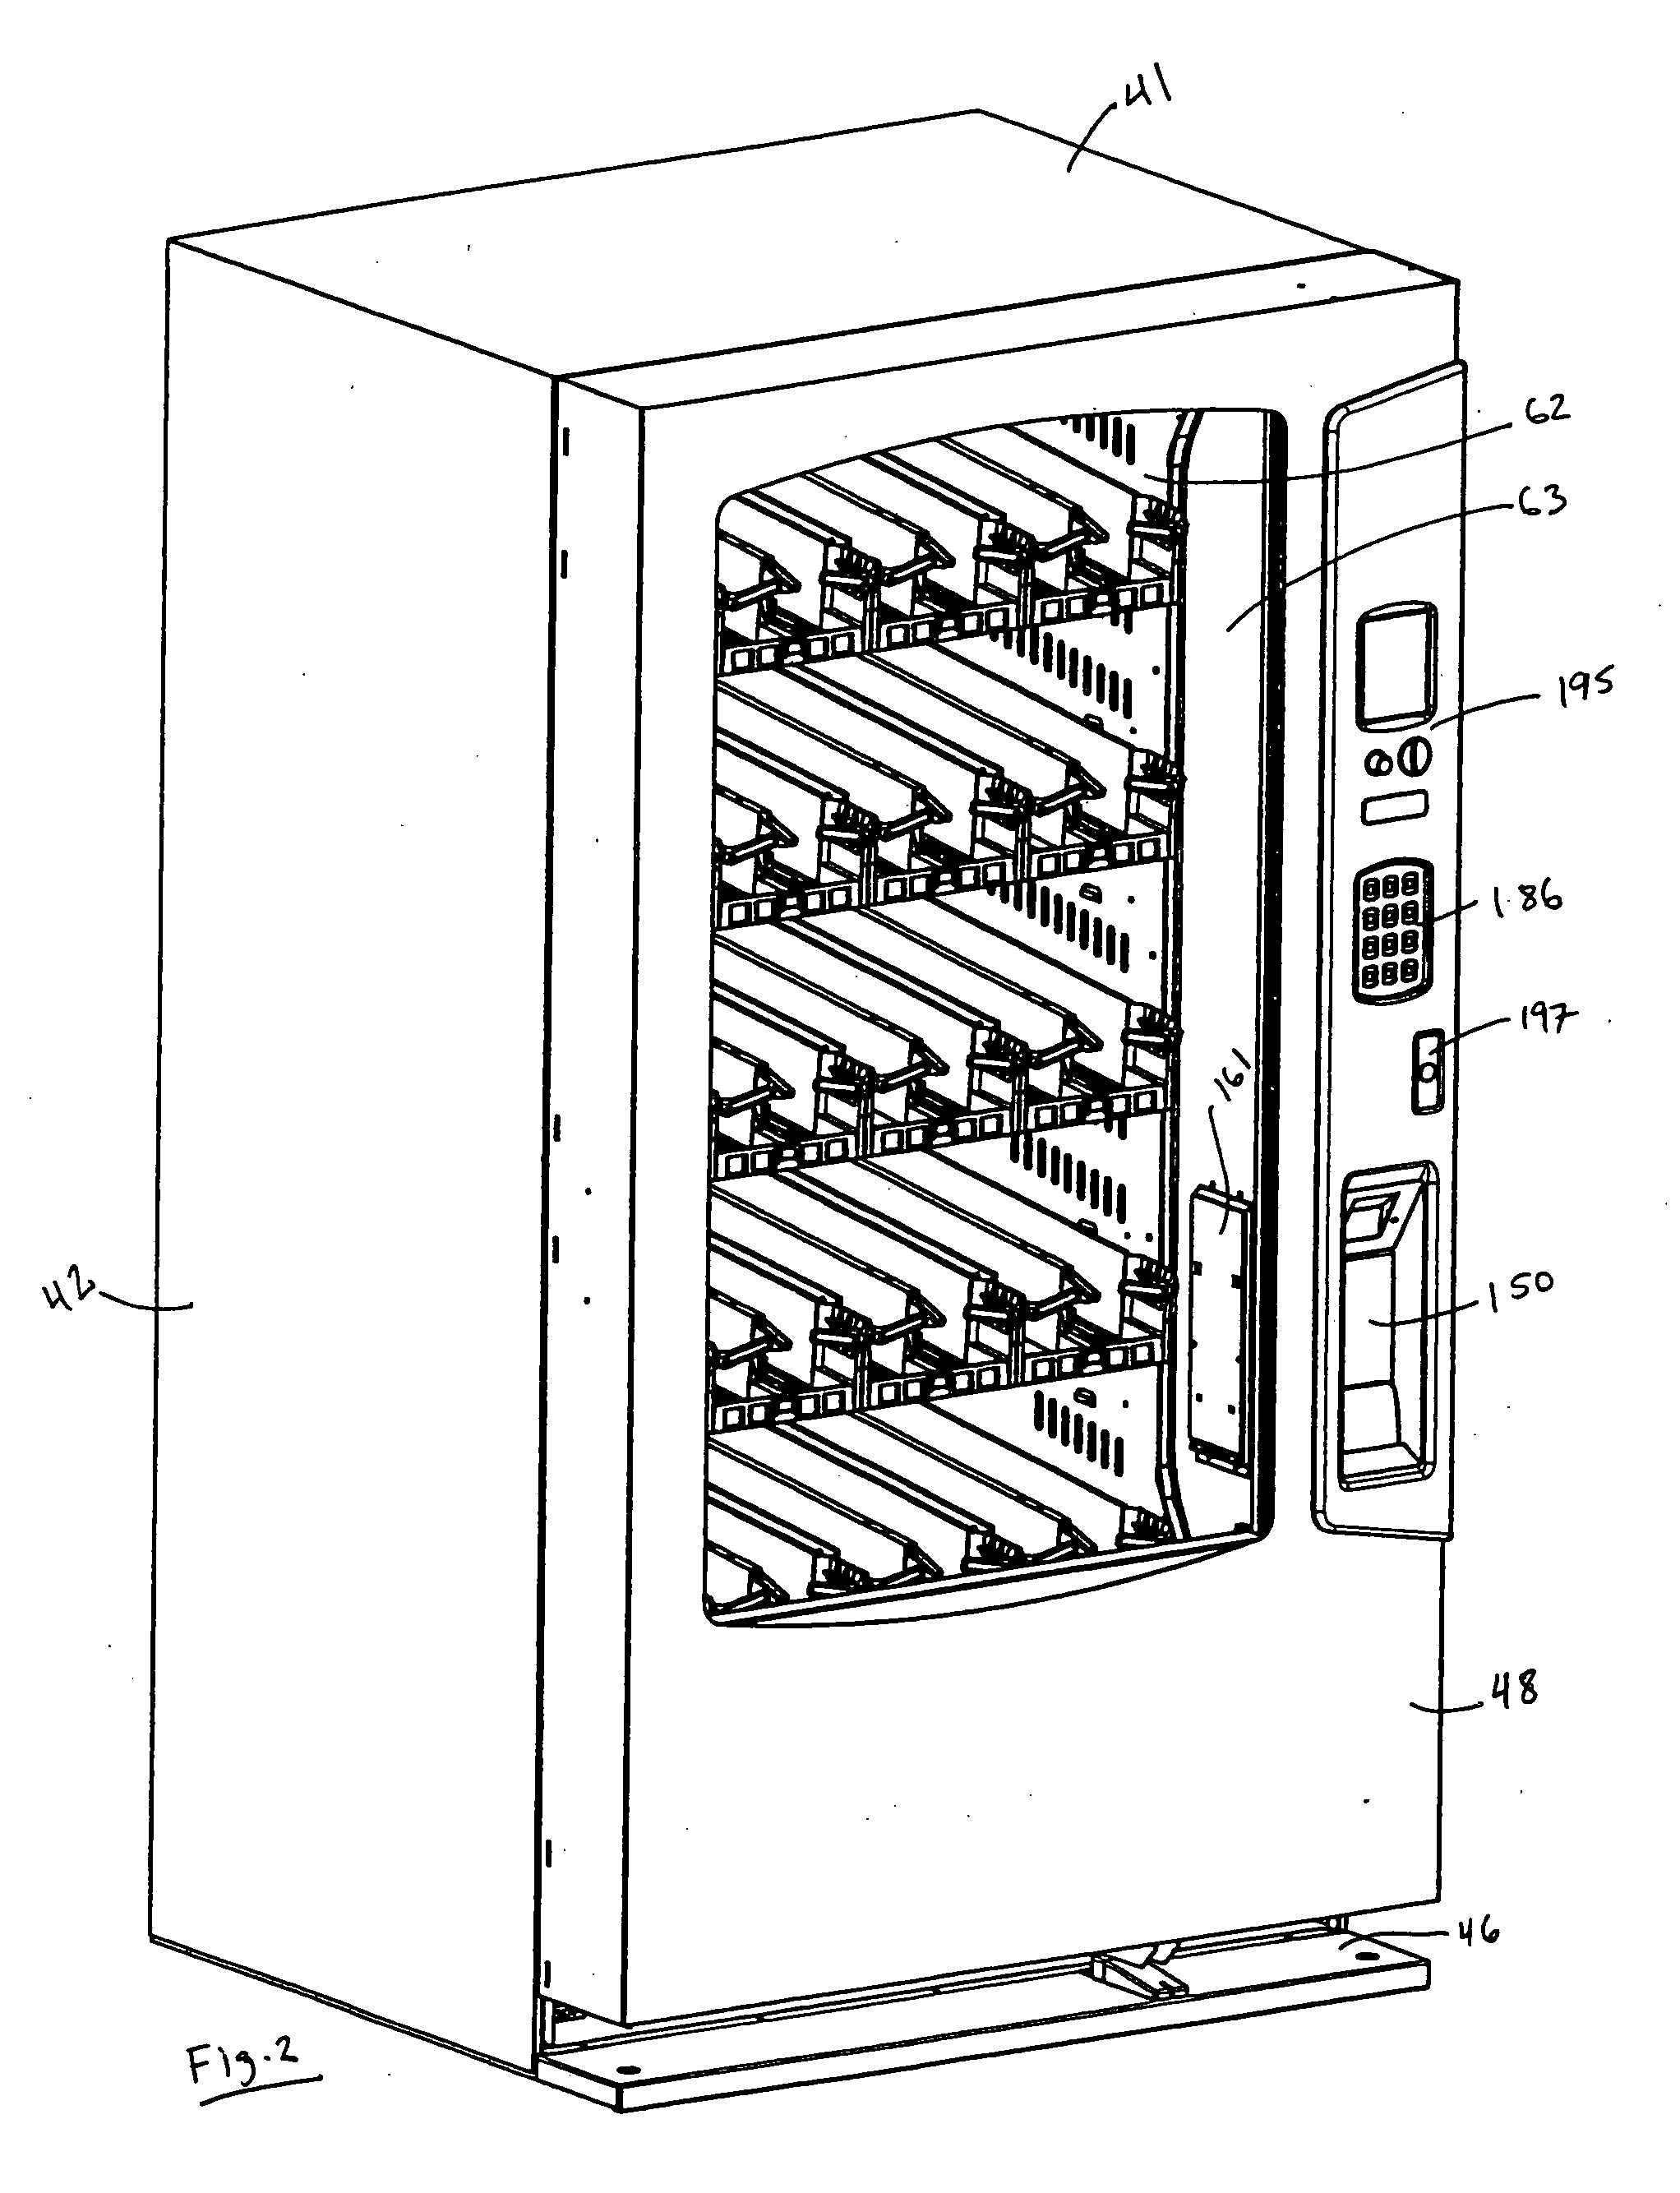 Modular cabinet for vending machines